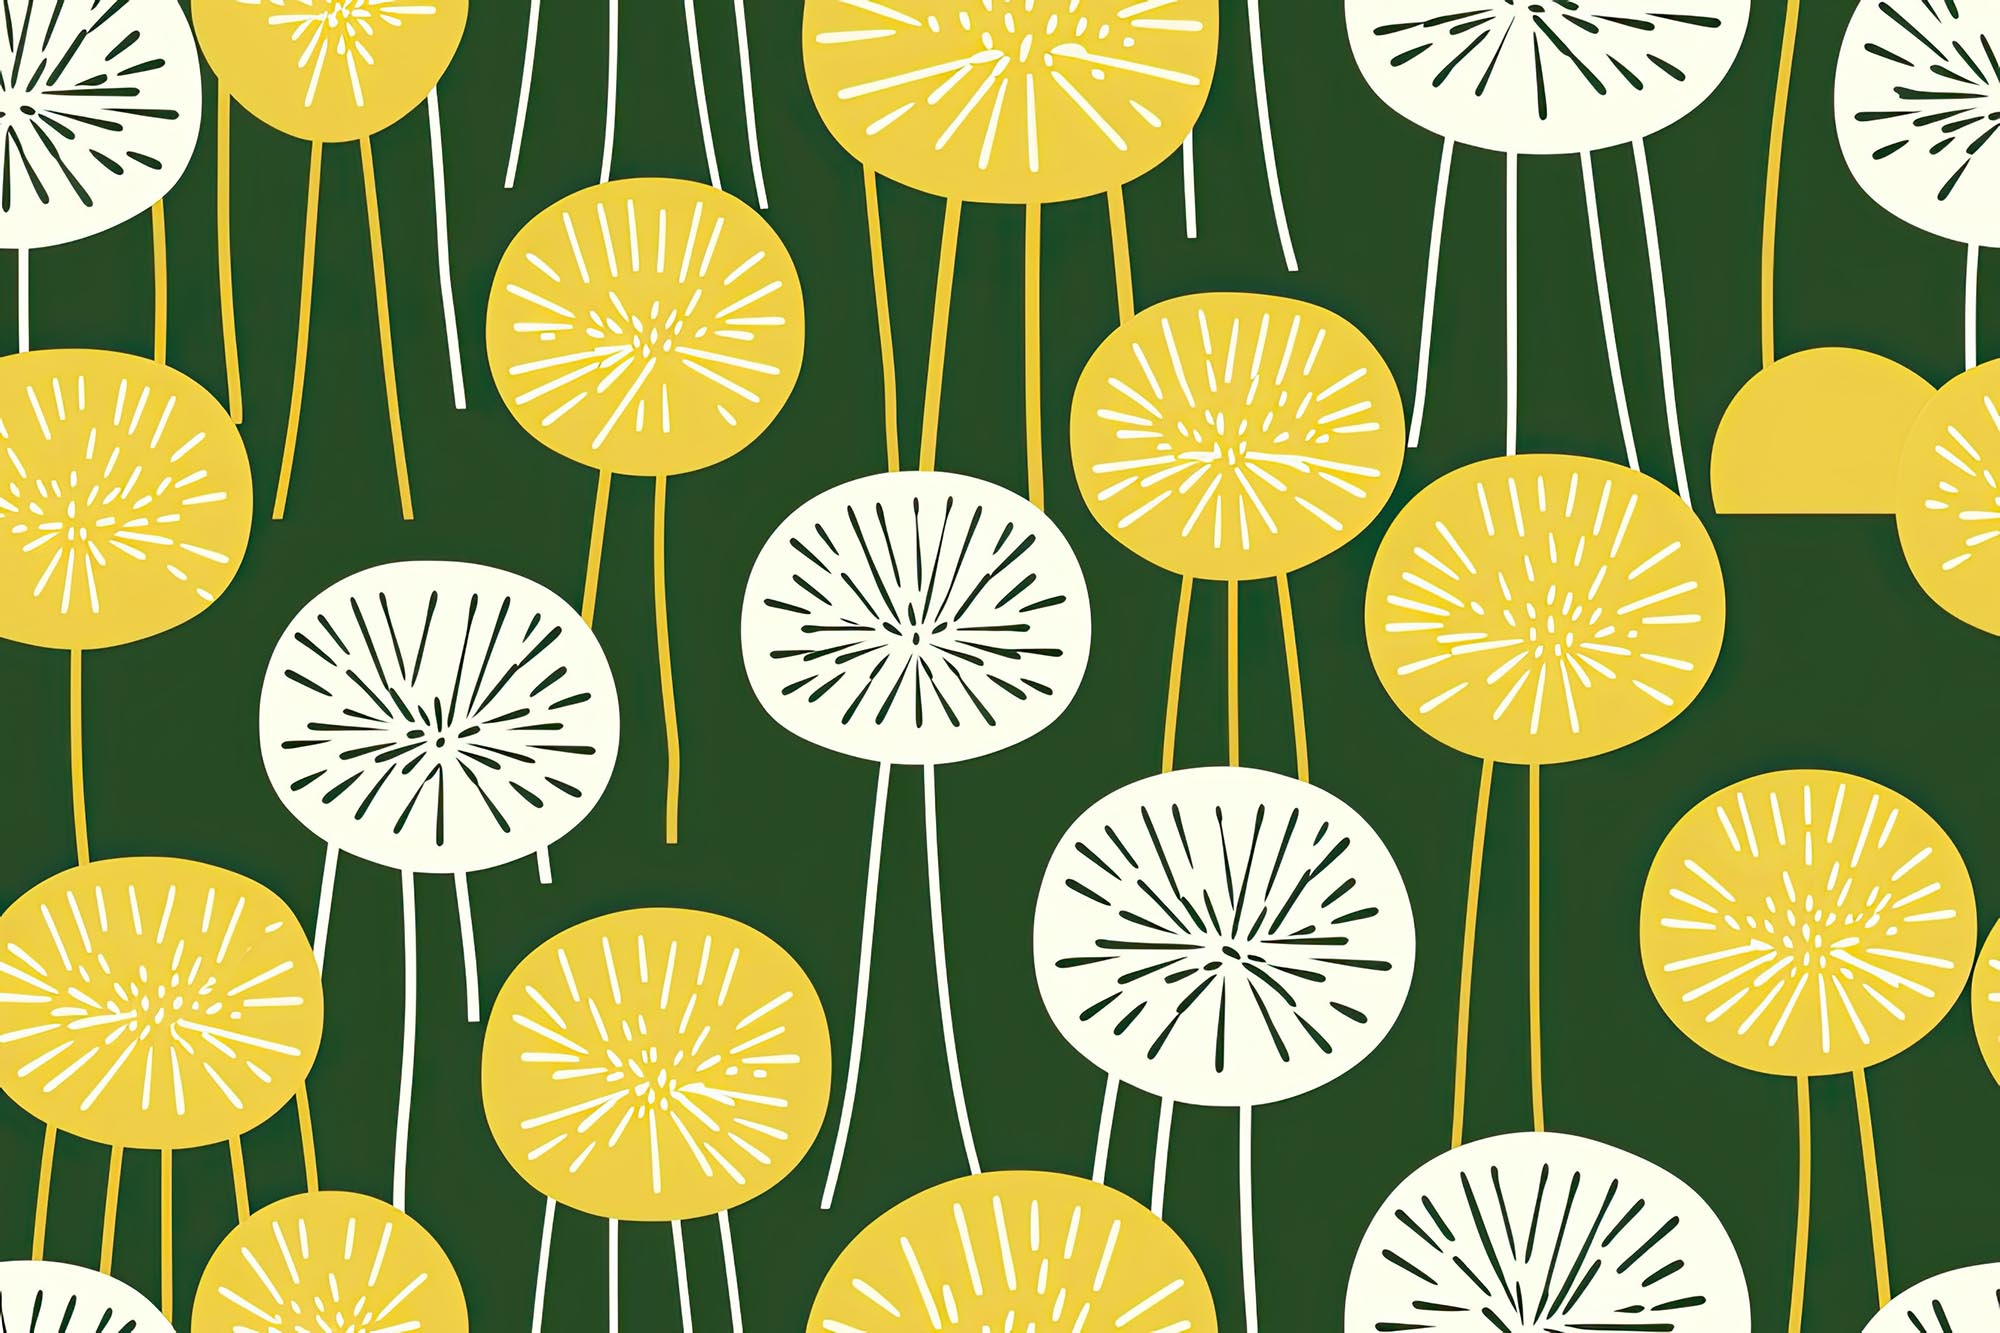 Dandelions in green yellow and white seamless repeating pattern